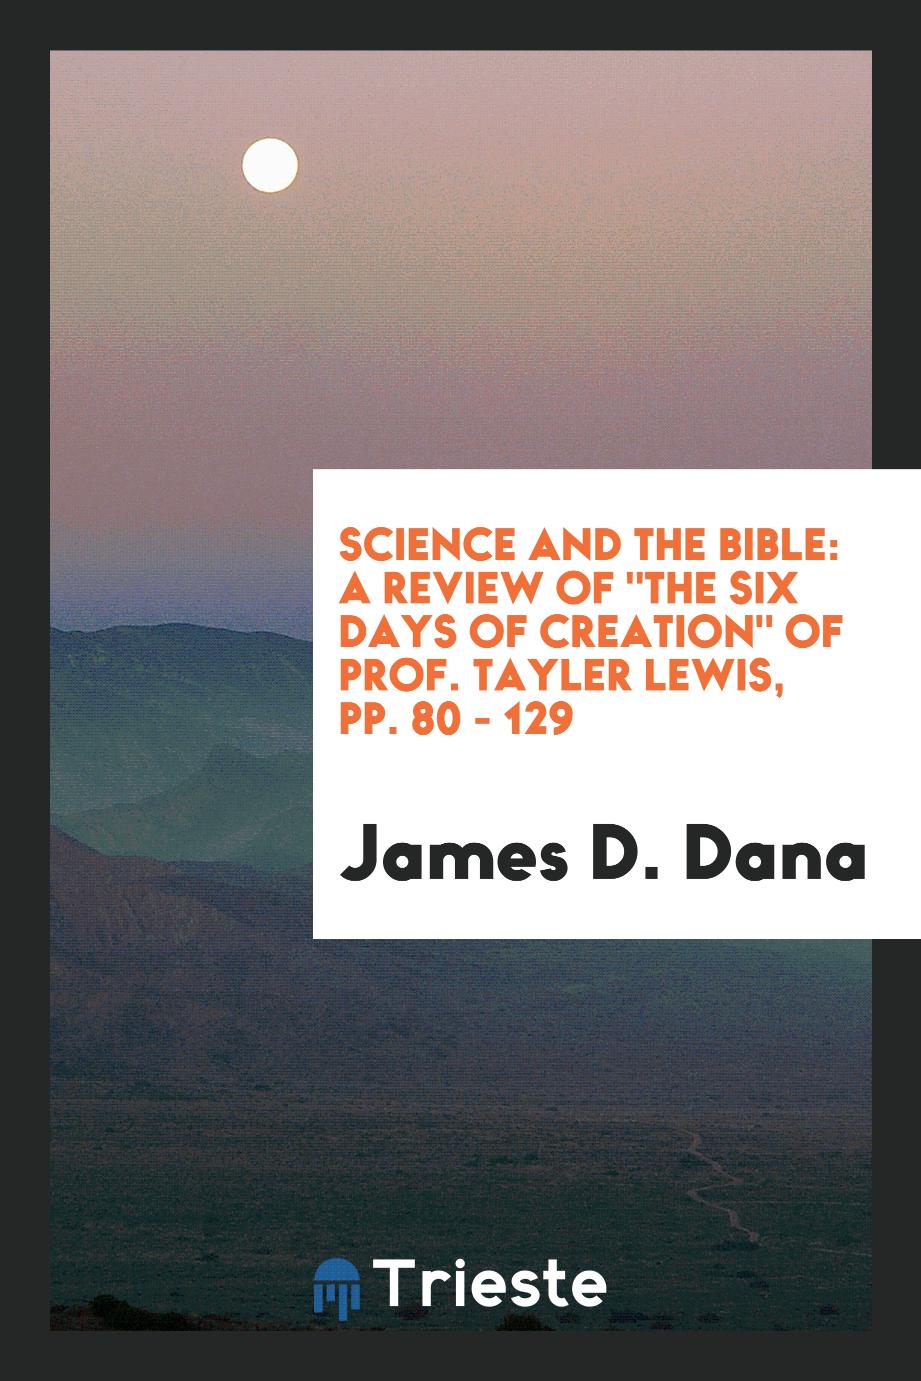 Science and the Bible: A Review of "the Six Days of Creation" of Prof. Tayler Lewis, pp. 80 - 129